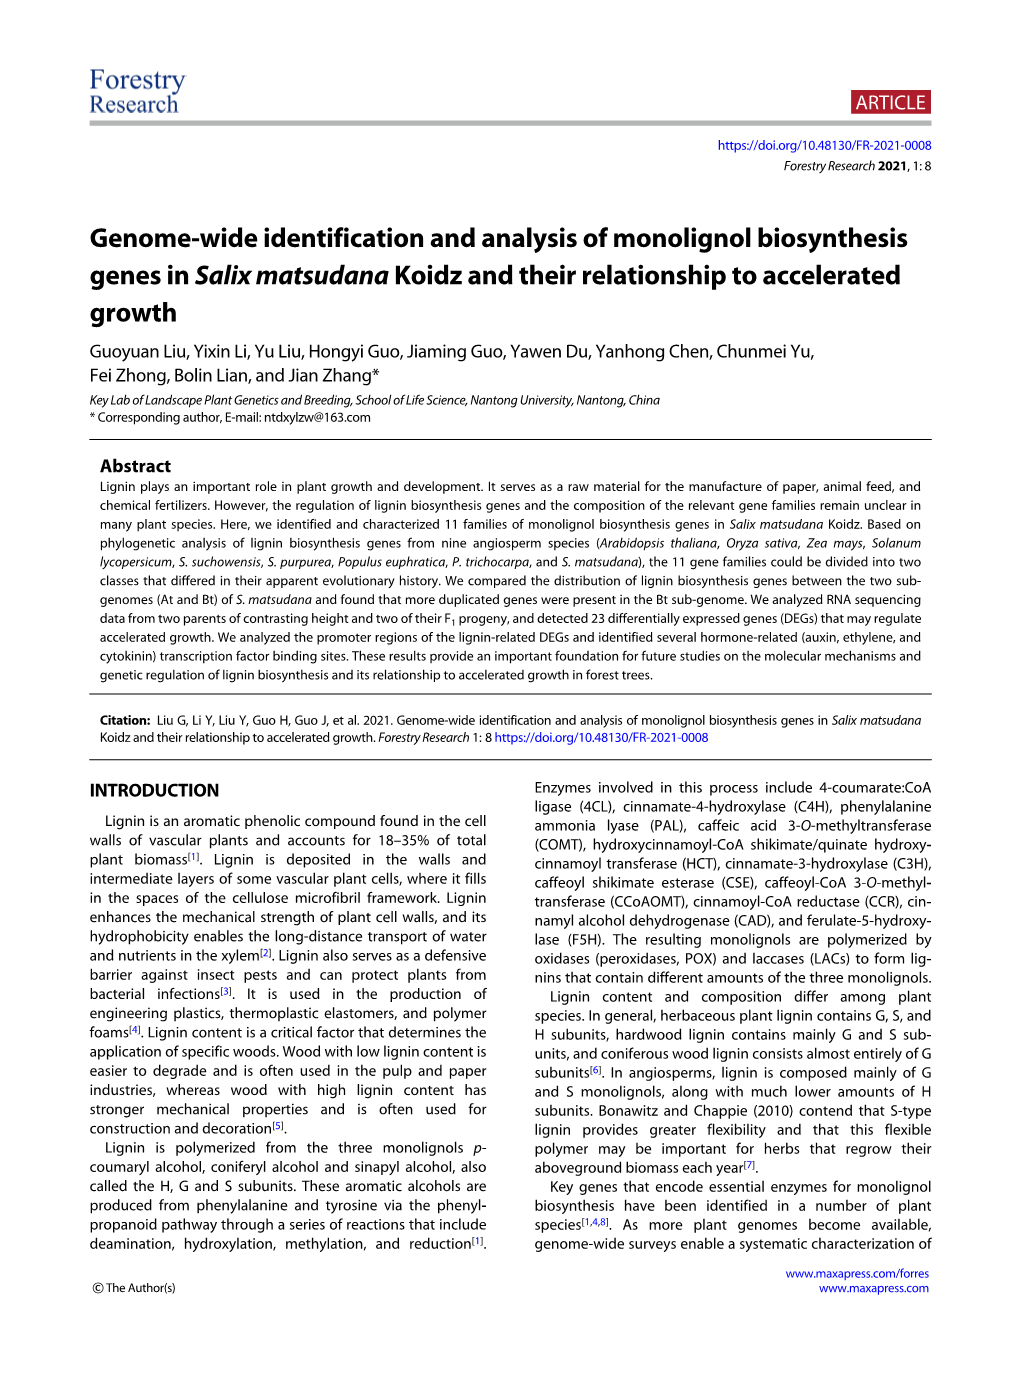 Genome-Wide Identification and Analysis of Monolignol Biosynthesis